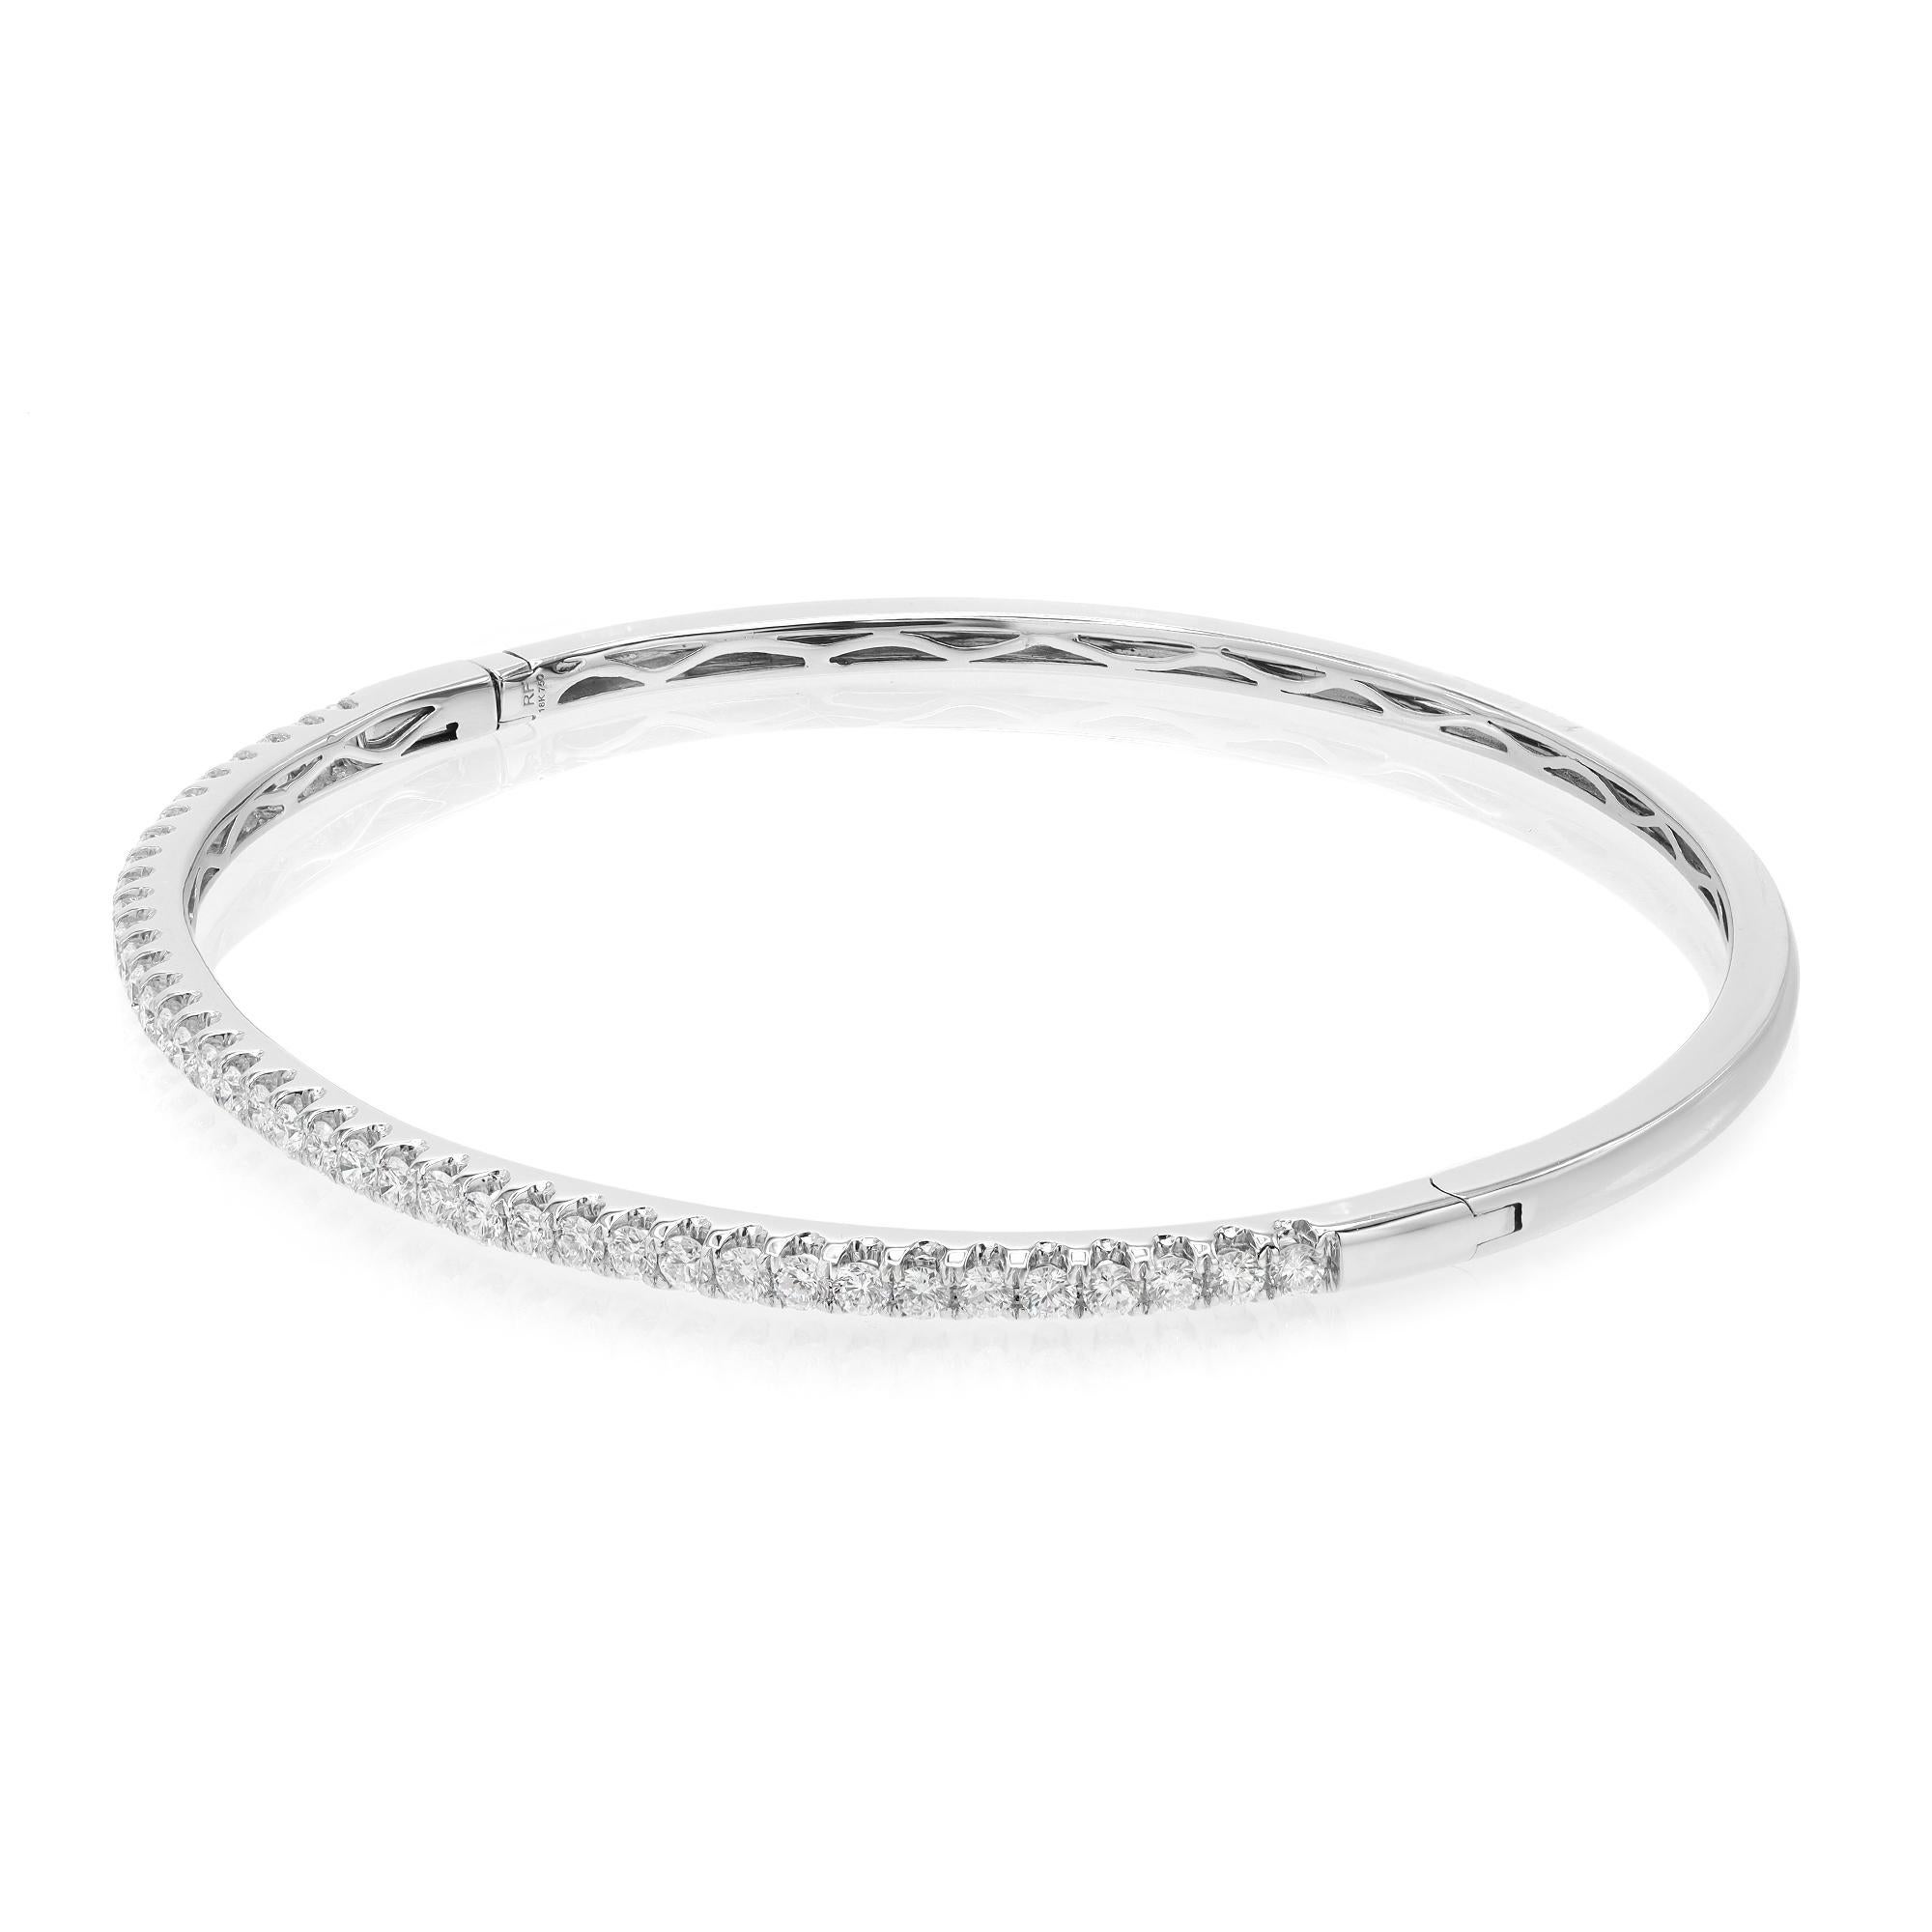 This beautifully crafted bangle bracelet features round brilliant cut diamonds set halfway through the bangle in four prong setting. Crafted in 18k white gold. Total diamond weight: 0.99 carat. Diamond Quality: F-G color and SI clarity. Wrist size: